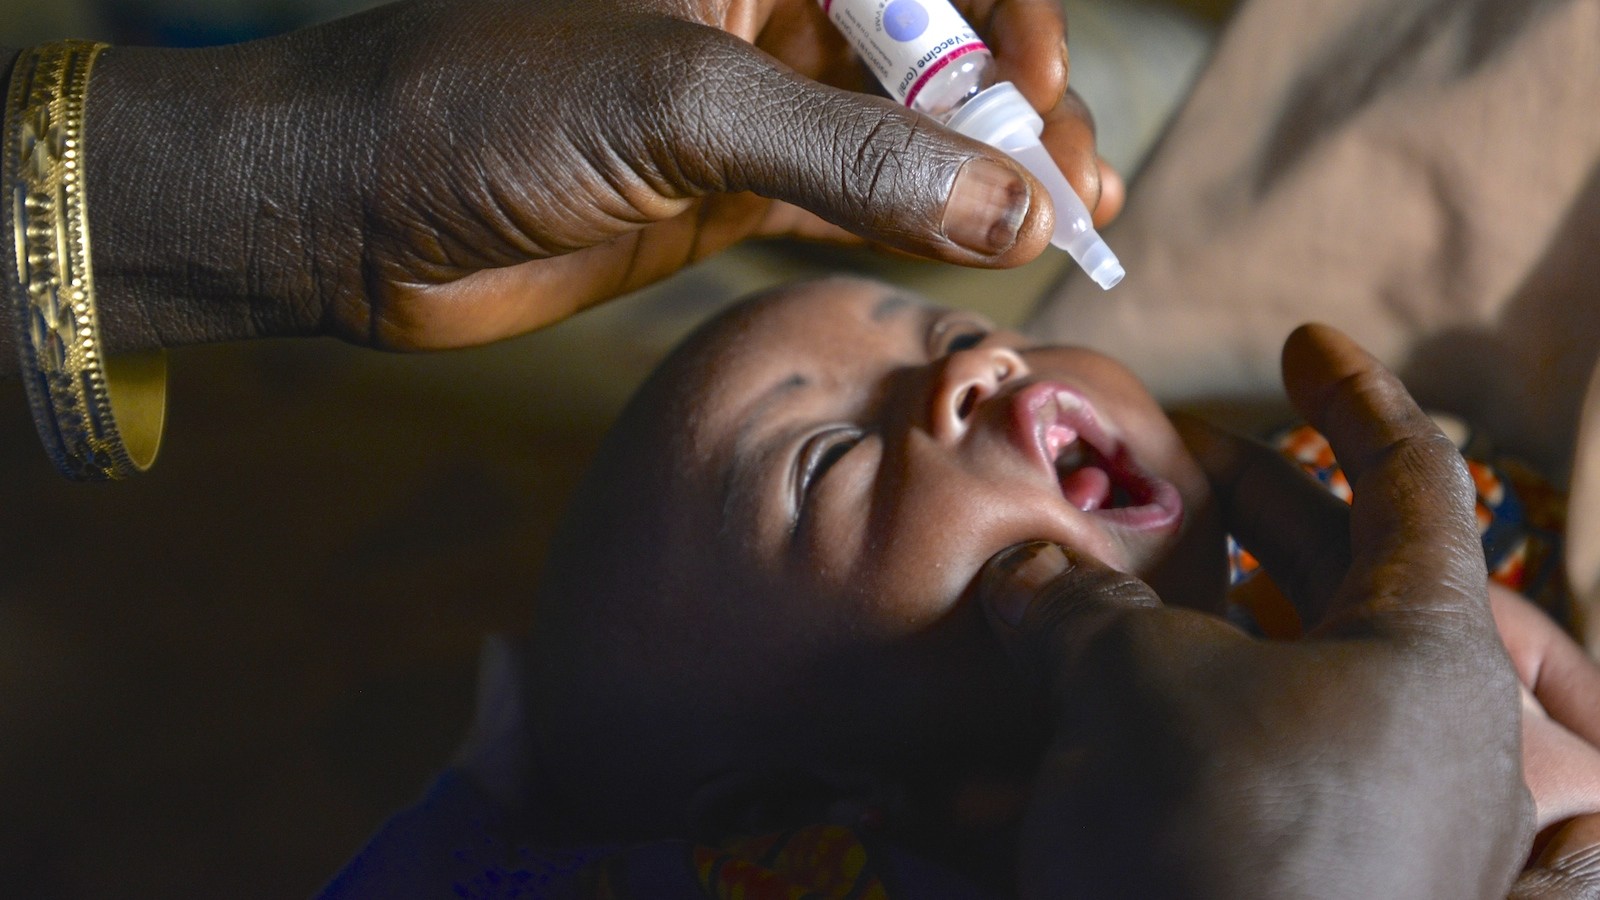 World Polio Day 2015. A infant in Nigeria is immunized against polio during a UNICEF-supported vaccination drive in March,2015.